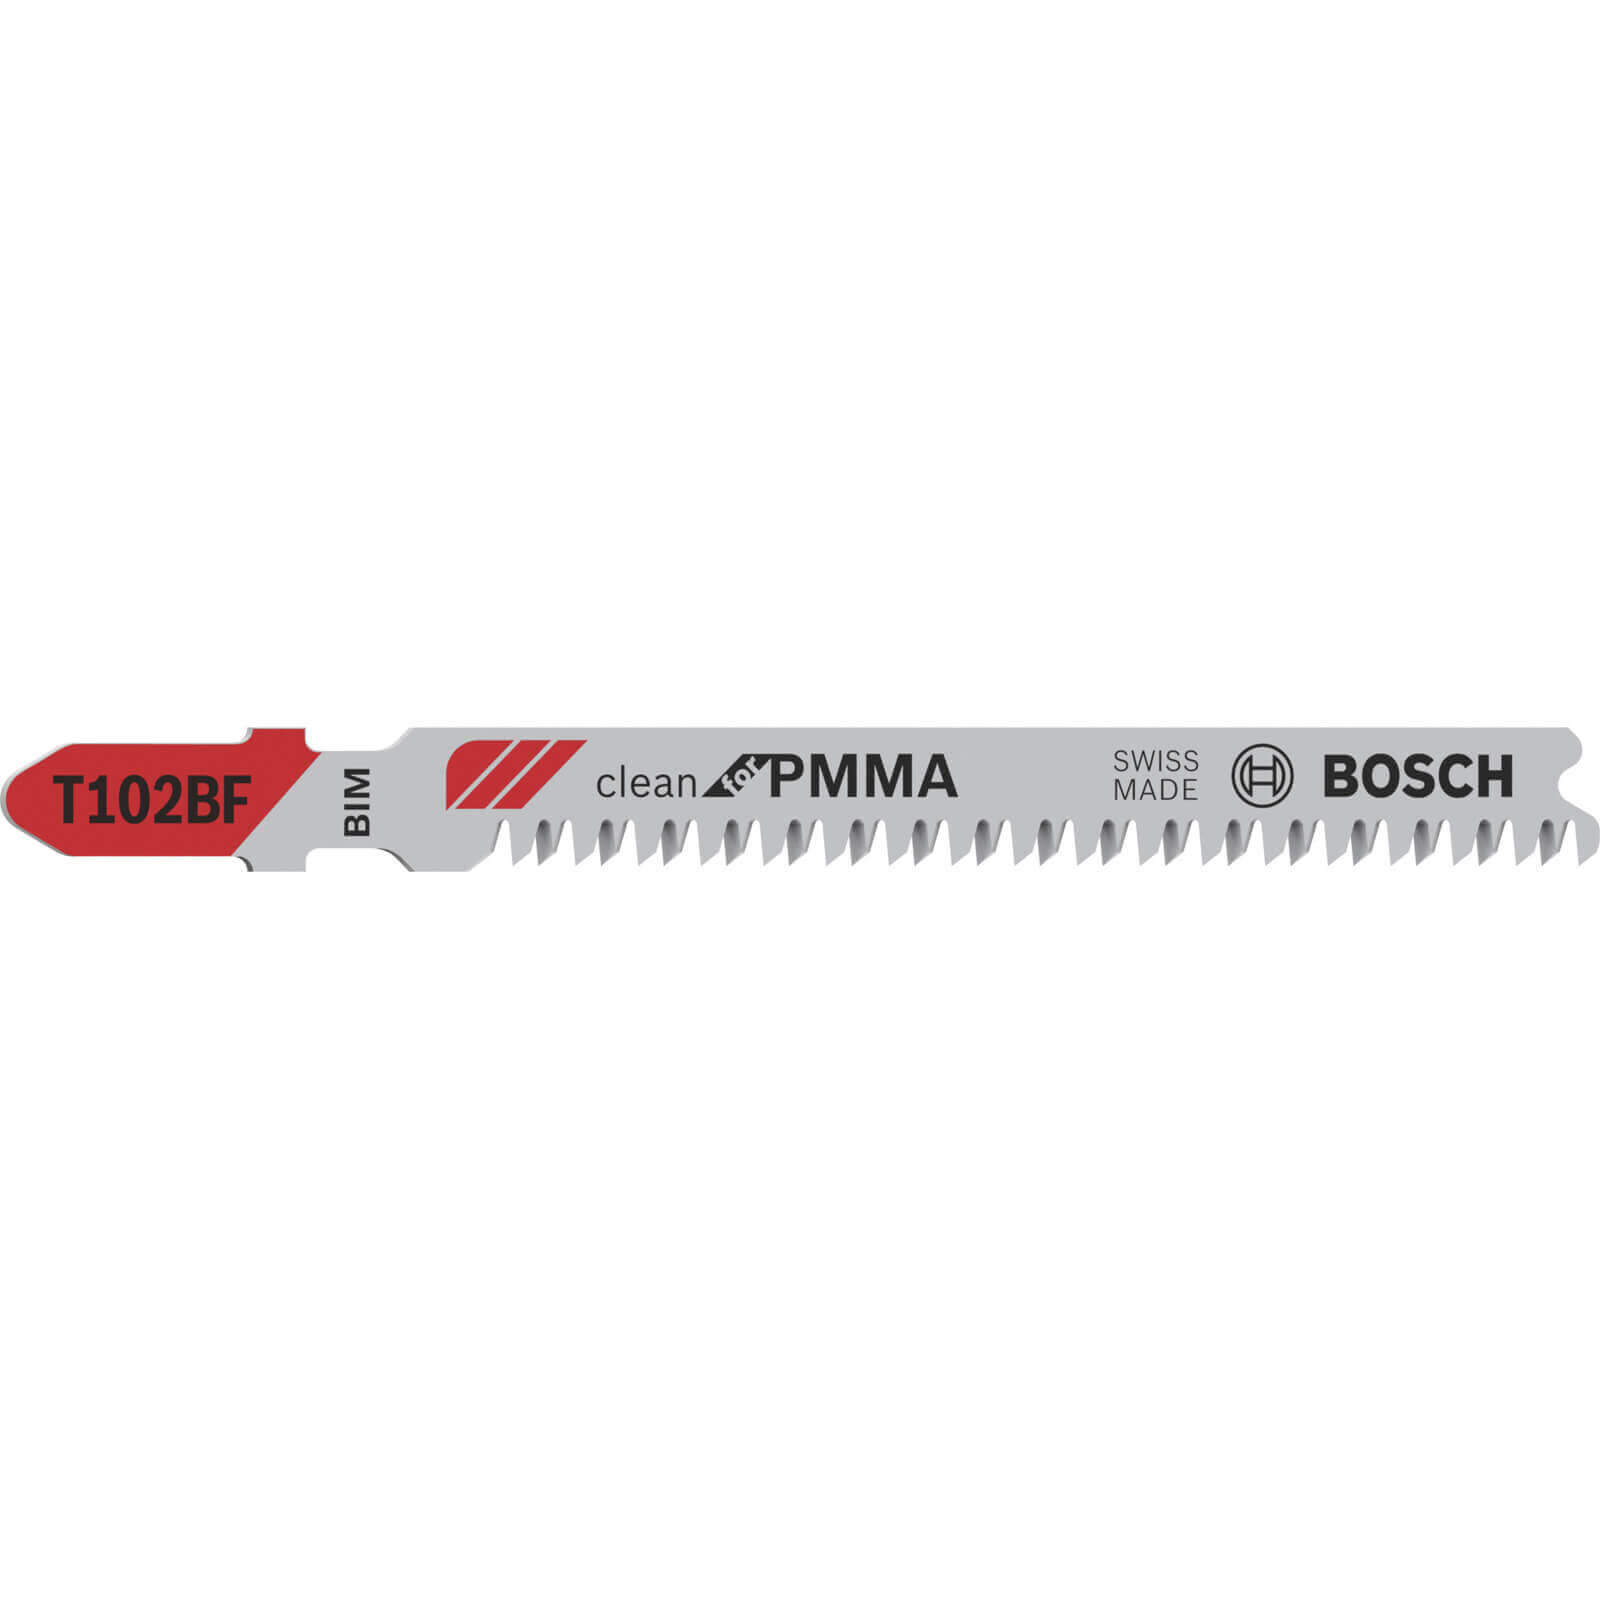 Image of Bosch T102BF Plastic Perspex Cutting Jigsaw Blade Pack of 5